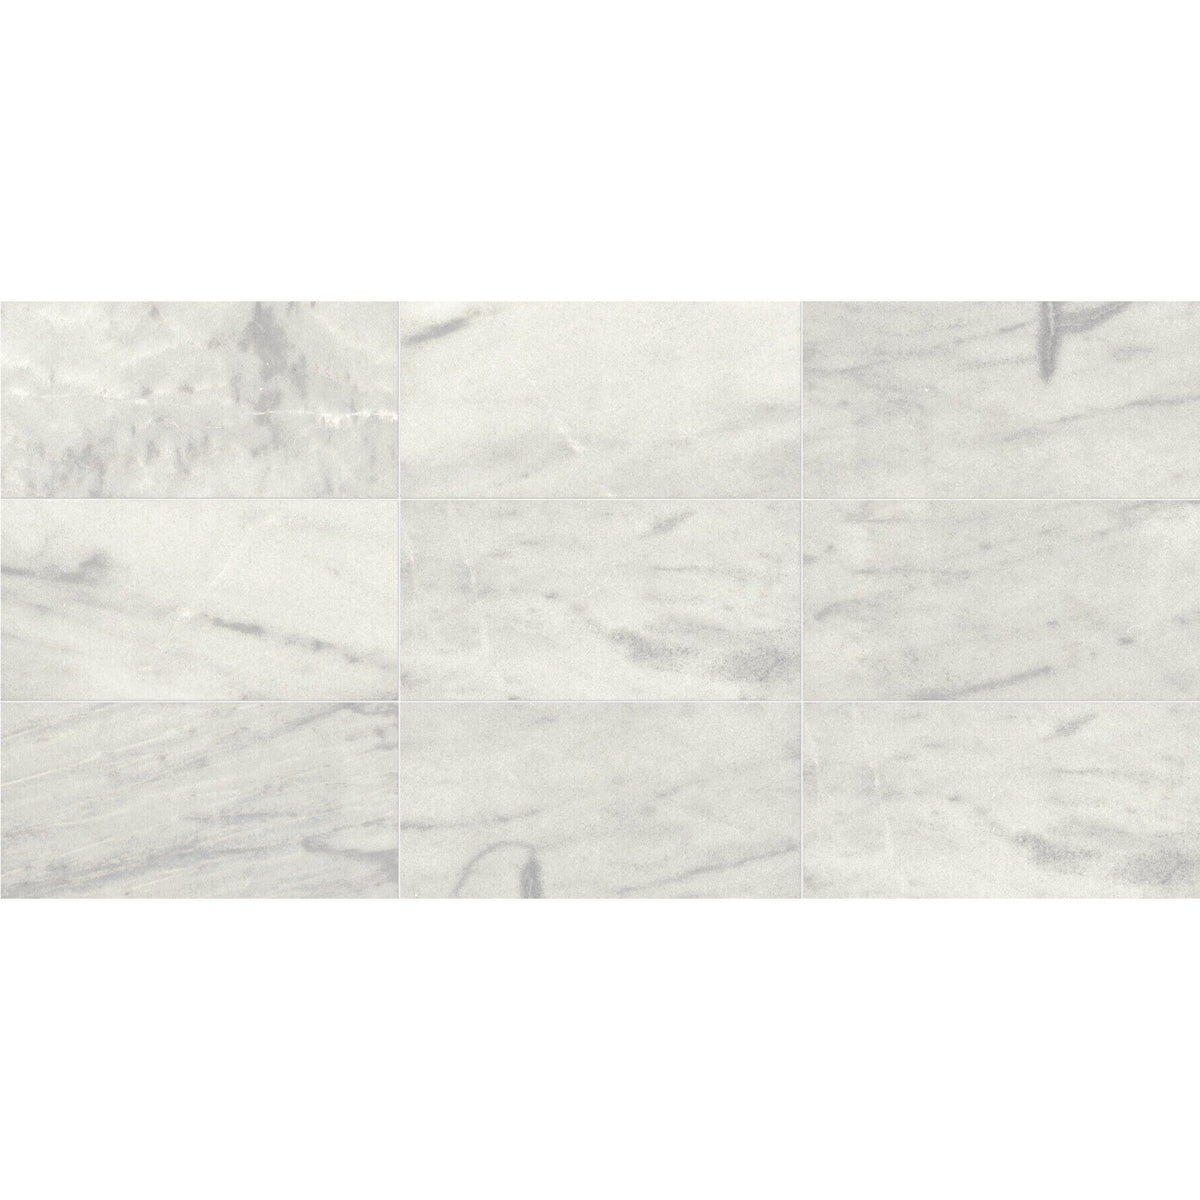 Daltile - Parksville Stone 12 in. x 24 in. - Yukon White Polished